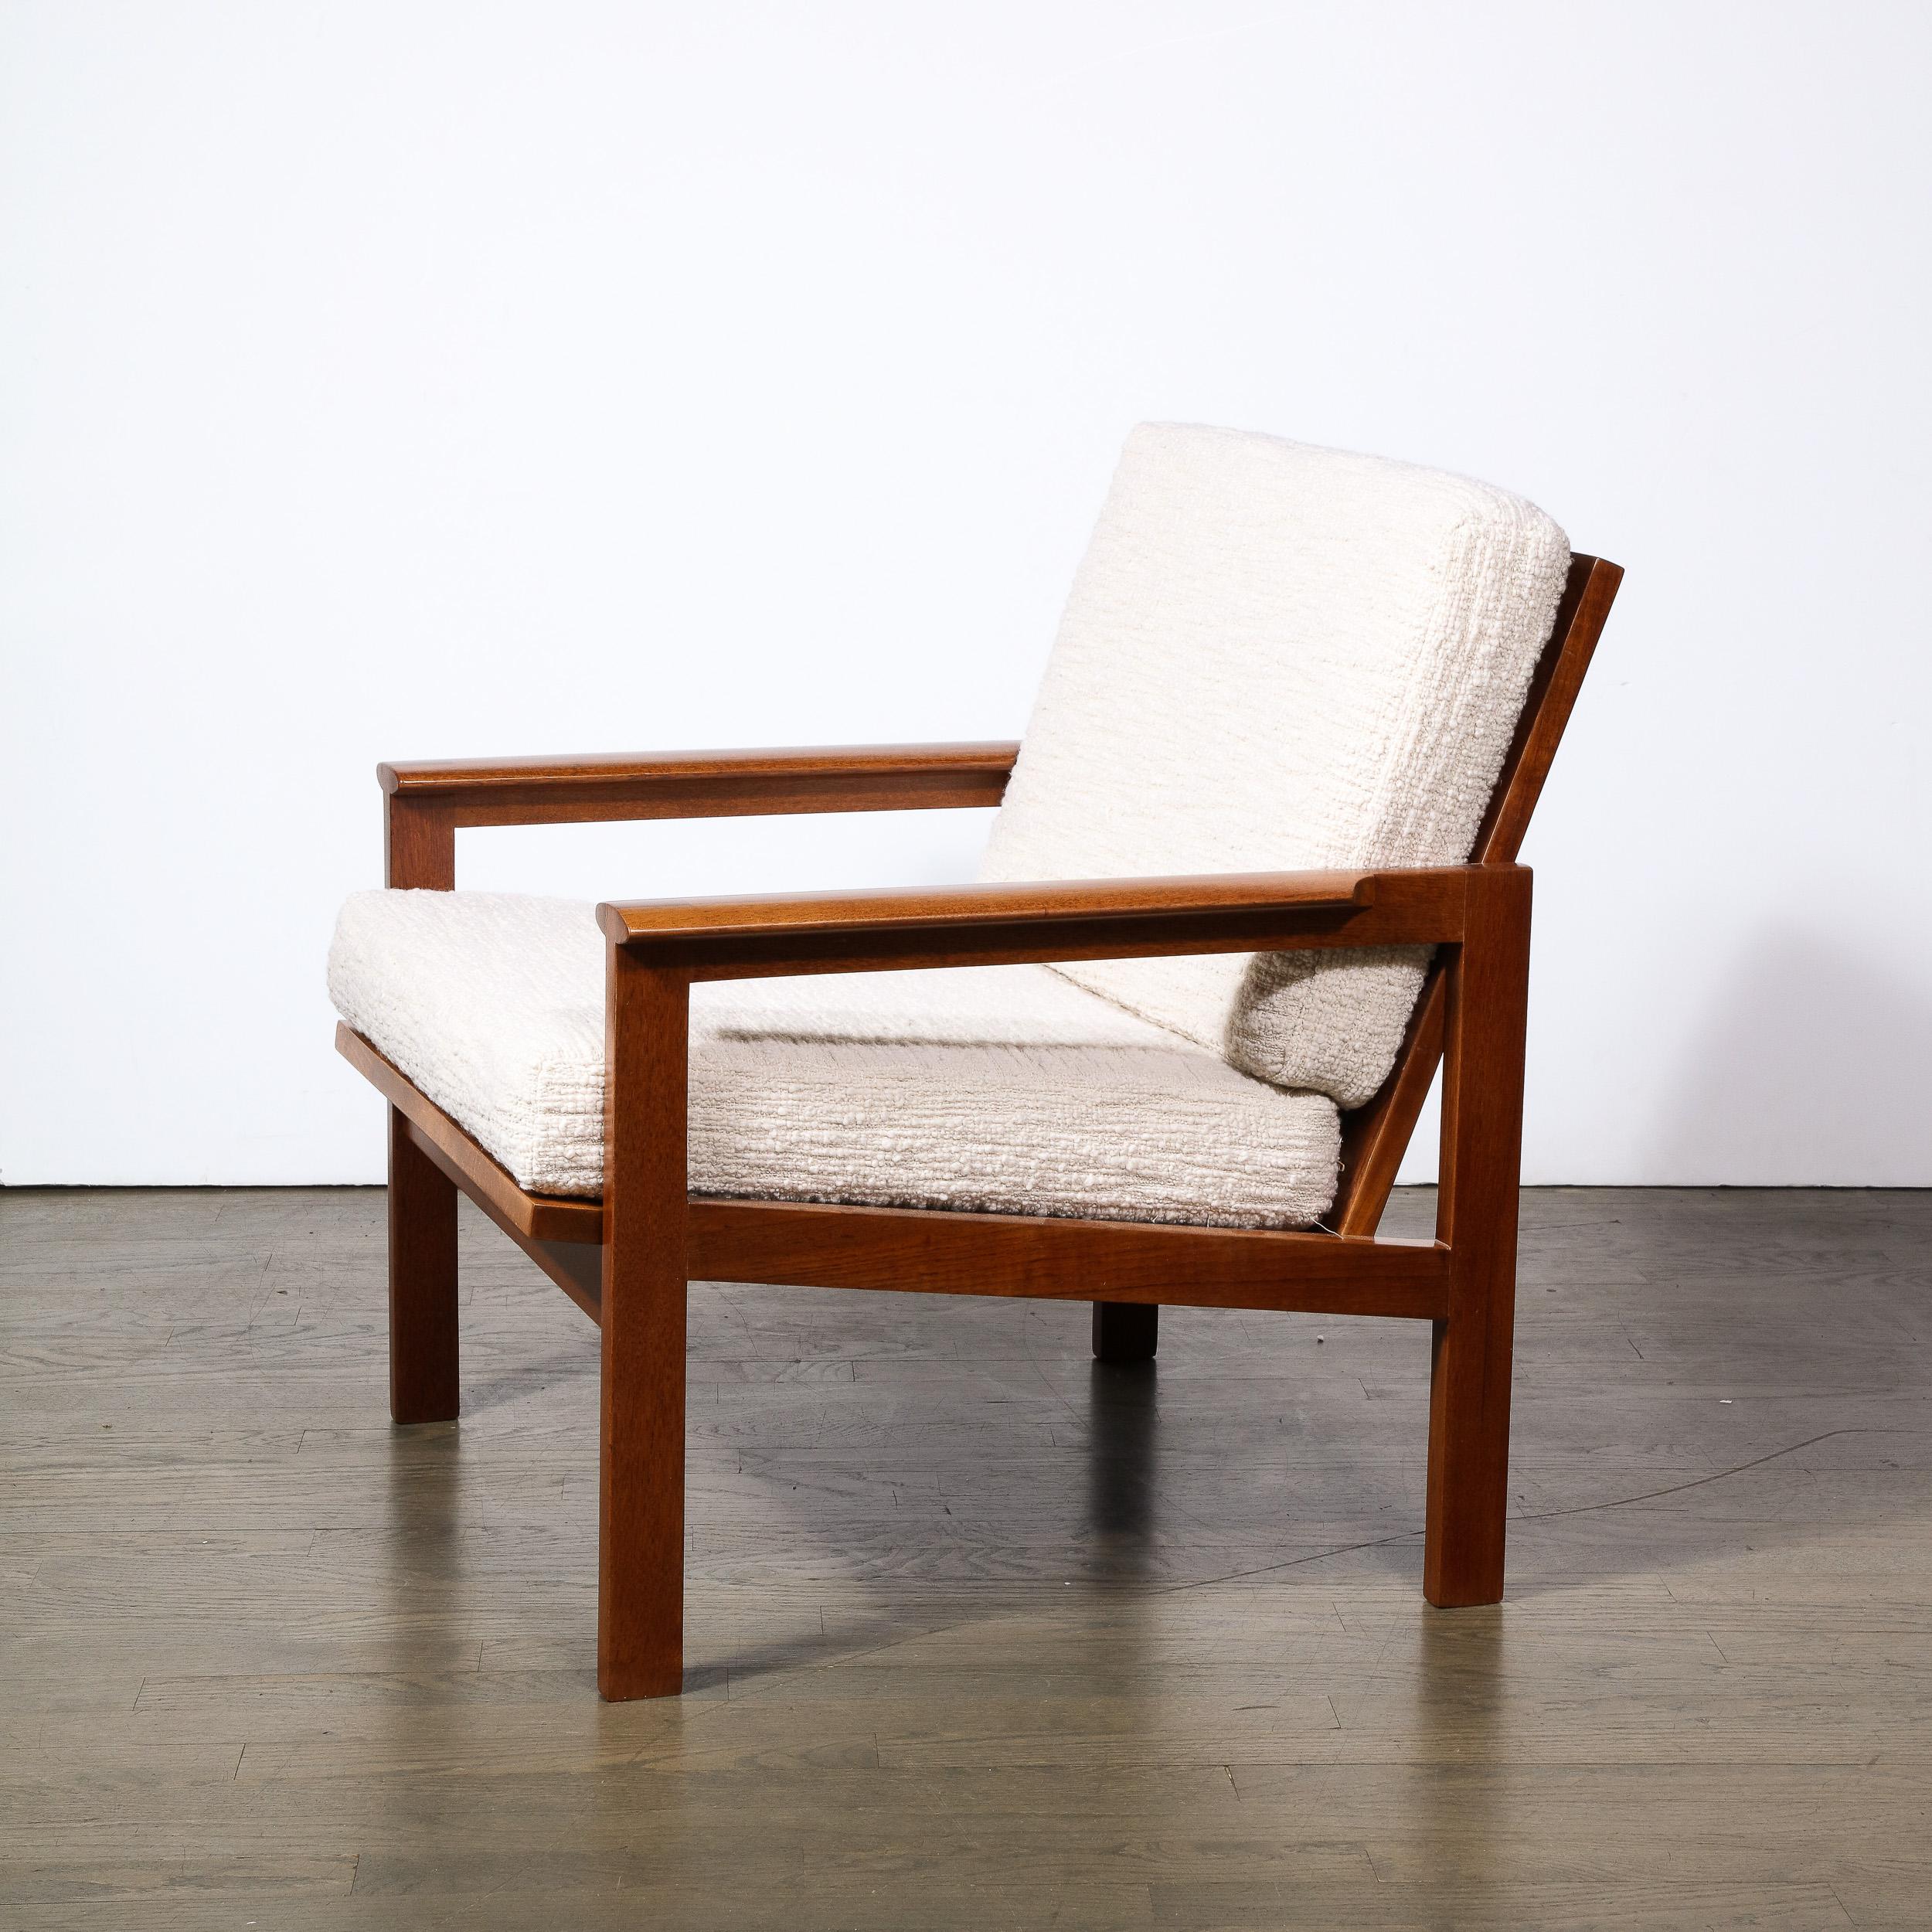 Mid-20th Century Mid-Century Modern Armchair in Hand Rubbed Teak and Holly Hunt Bouclé Fabric For Sale